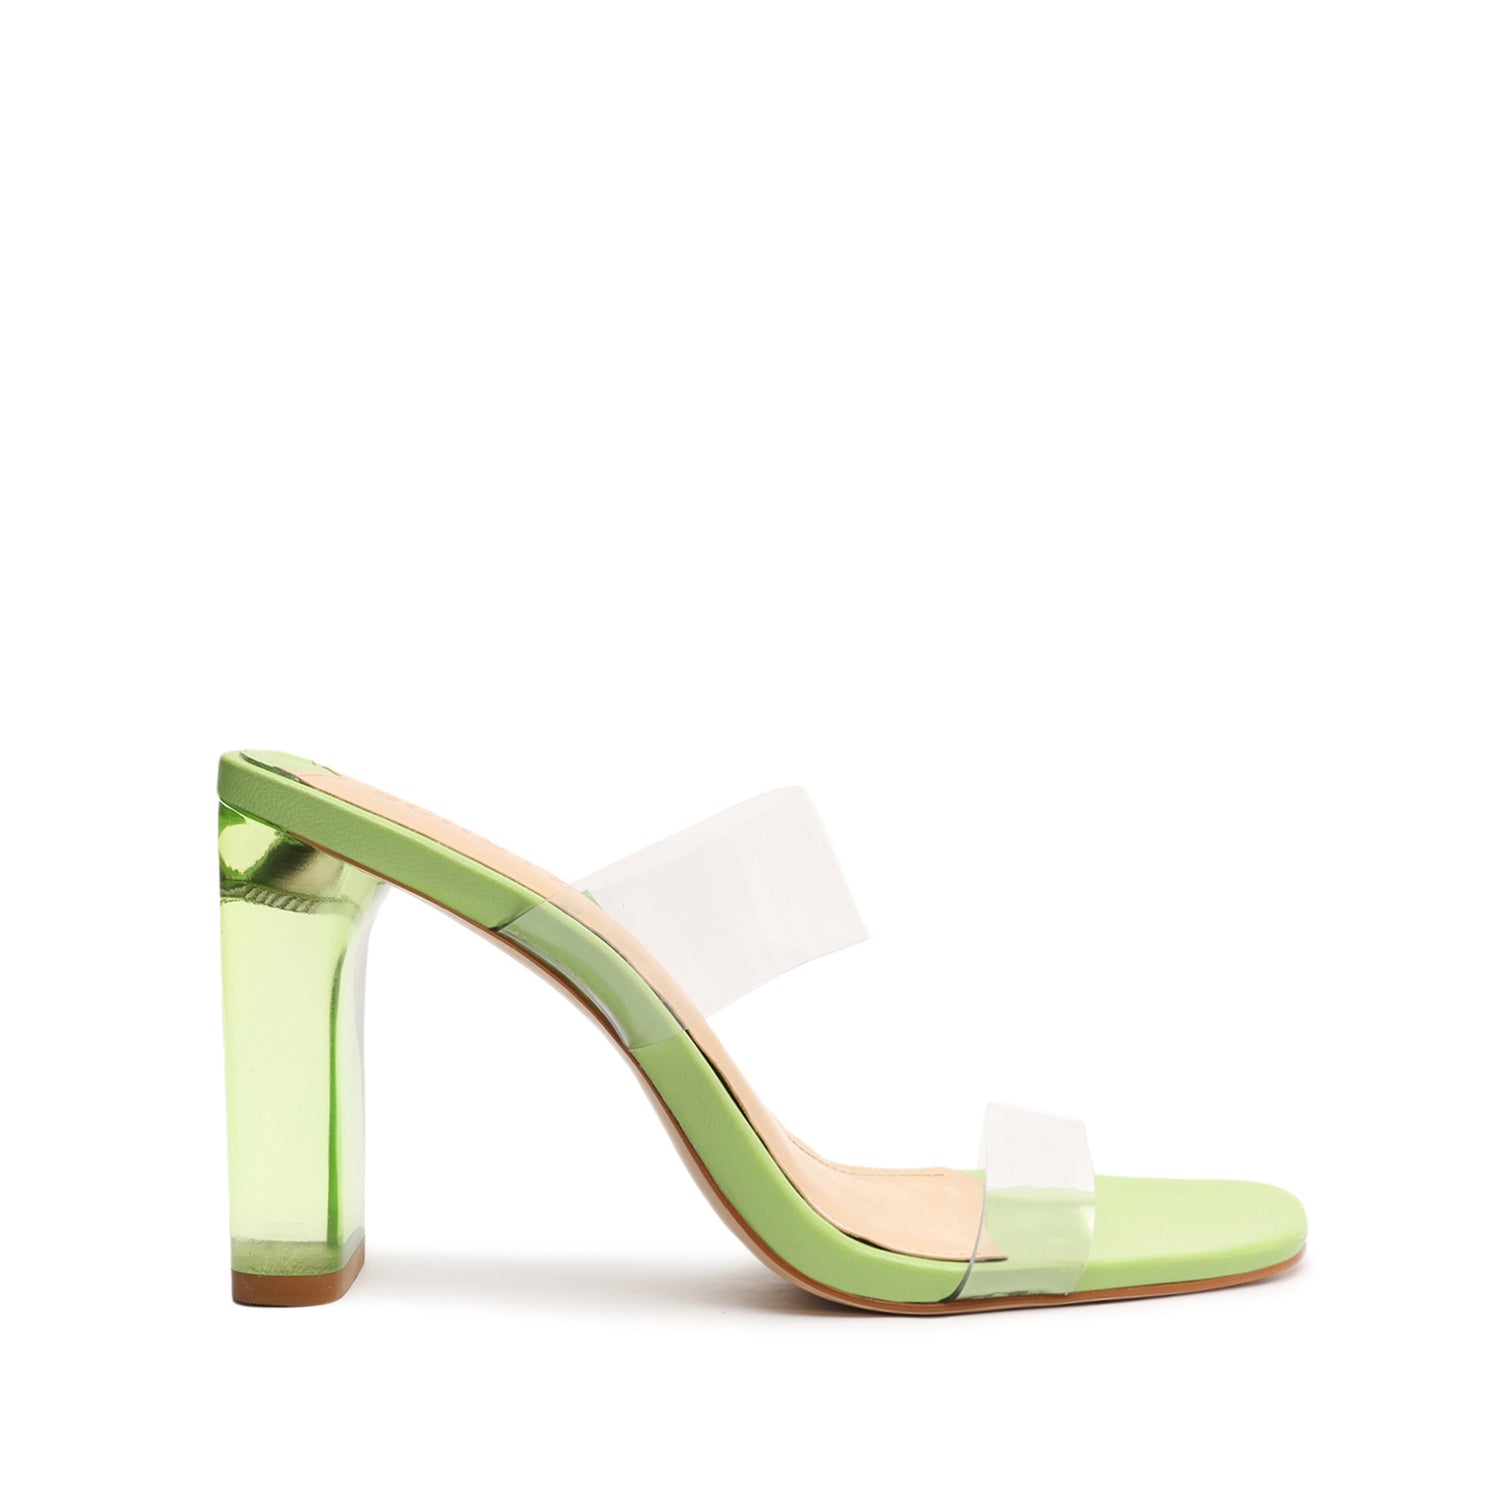 Ariella Acrylic Sandal Sandals OLD 5 Lime Green Nappa Leather & Vinyl - Schutz Shoes